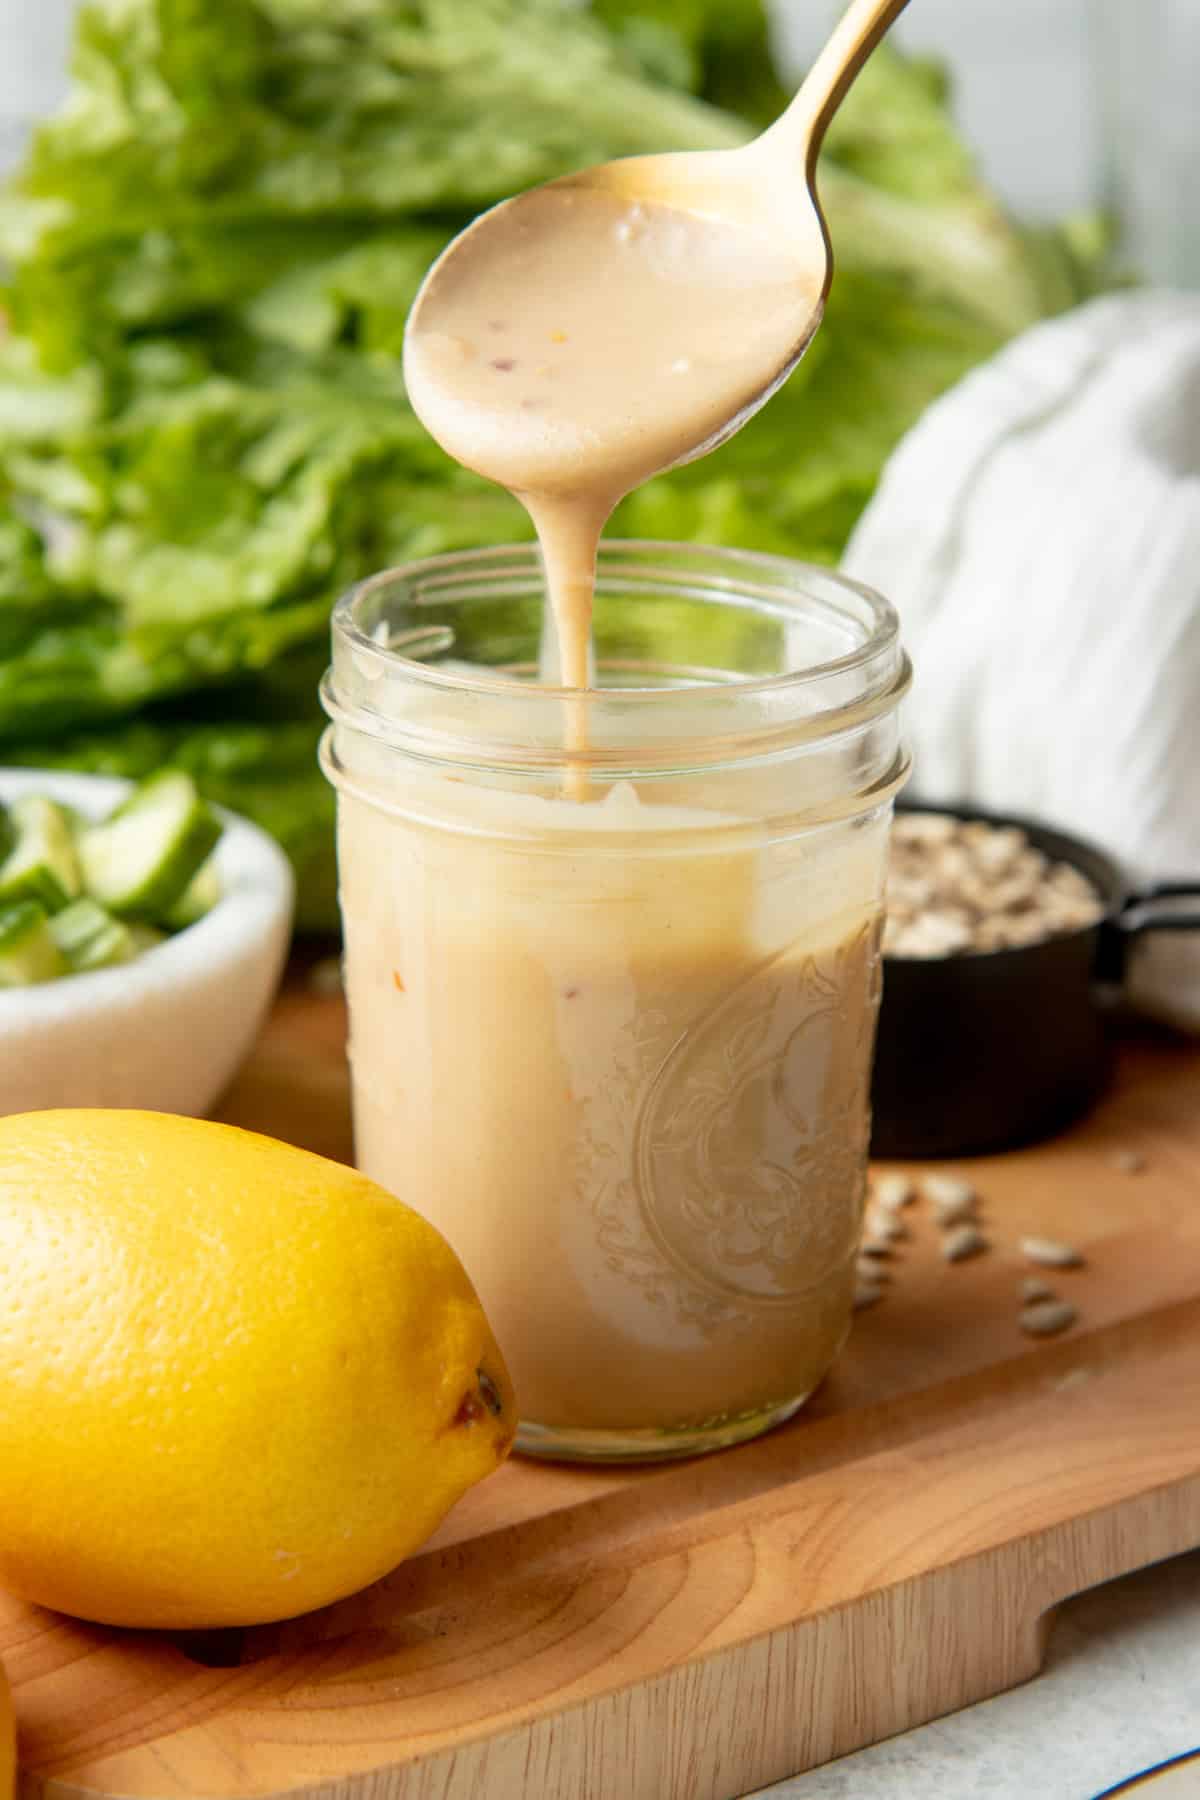 A gold spoon pours salad dressing into a mason jar sitting on a cutting board. A lemon, seeds, lettuce, and a white dishtowel are on the cutting board.